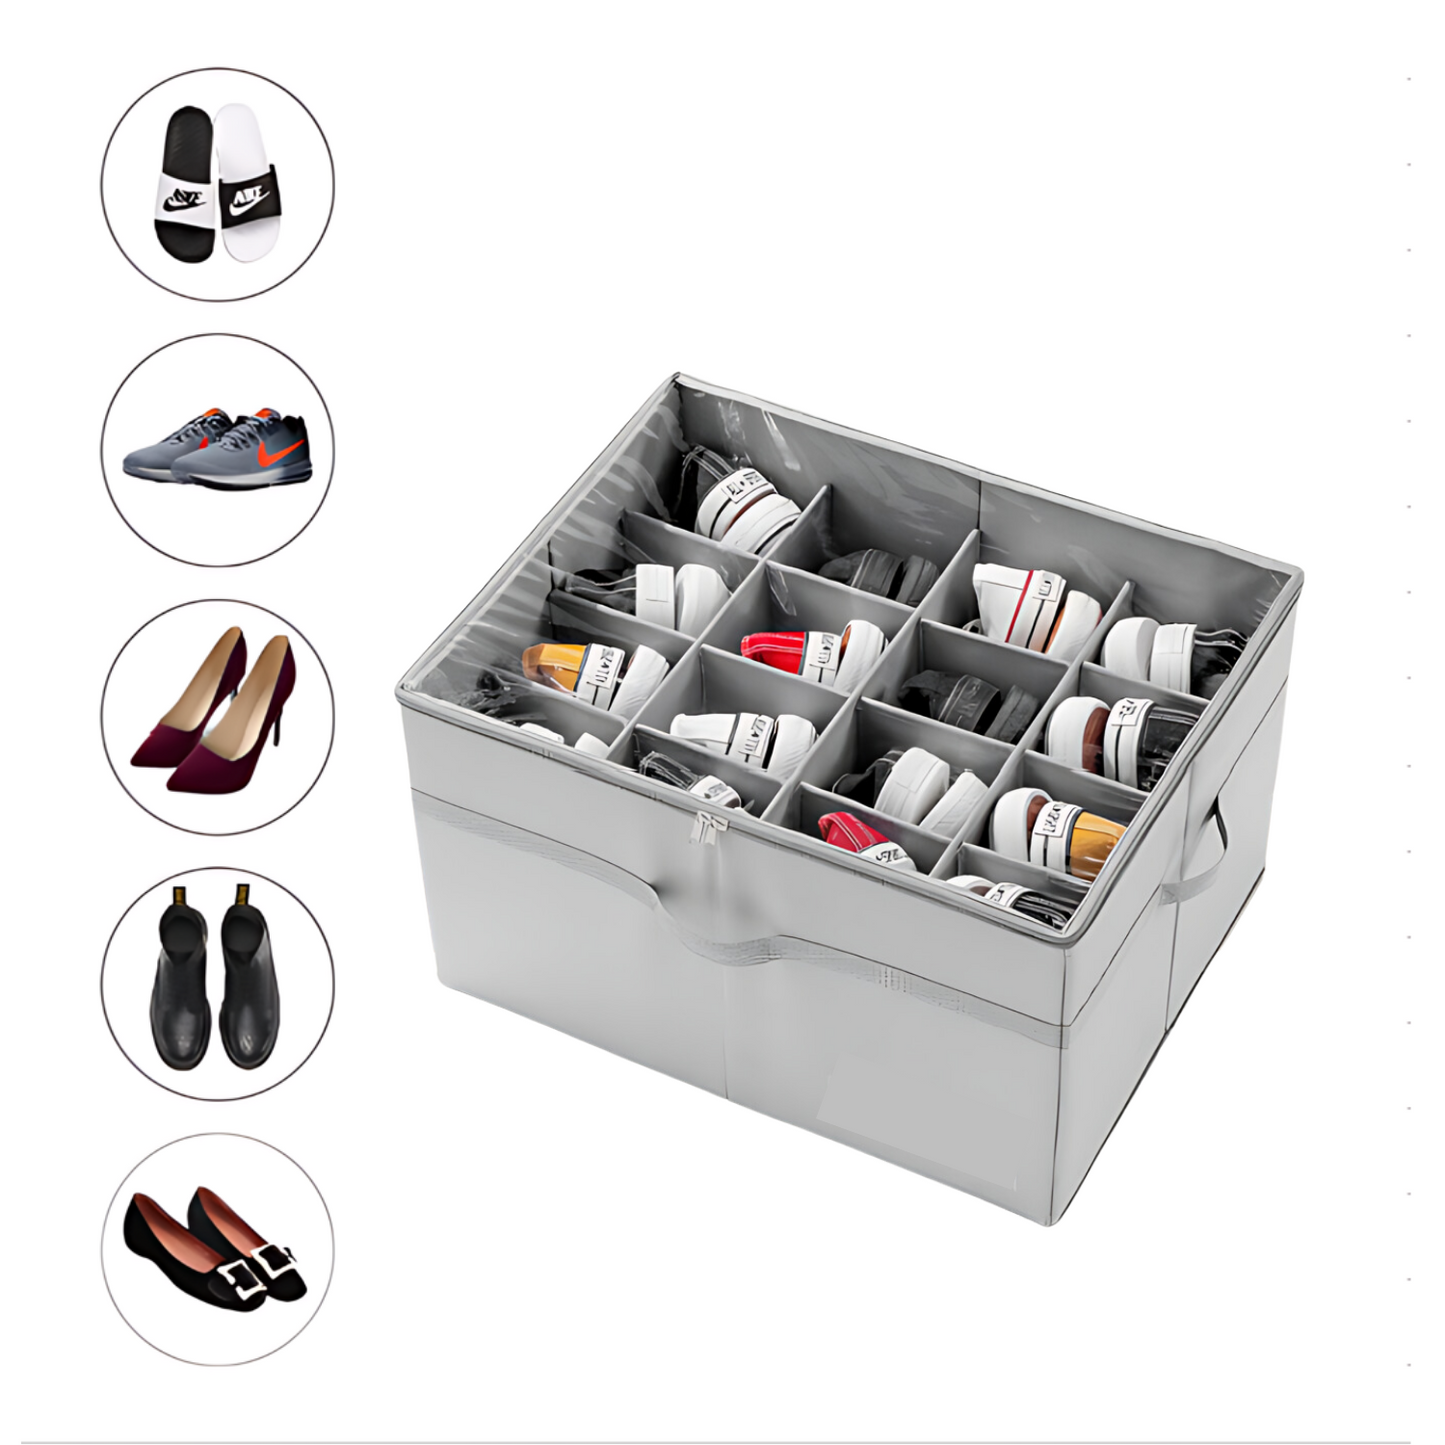 Qoolish Grey 16-Pair Shoe Organizer - Transparent, Compact, Reinforced Shoe Storage Solution for Neat and Tidy Shoe Organization